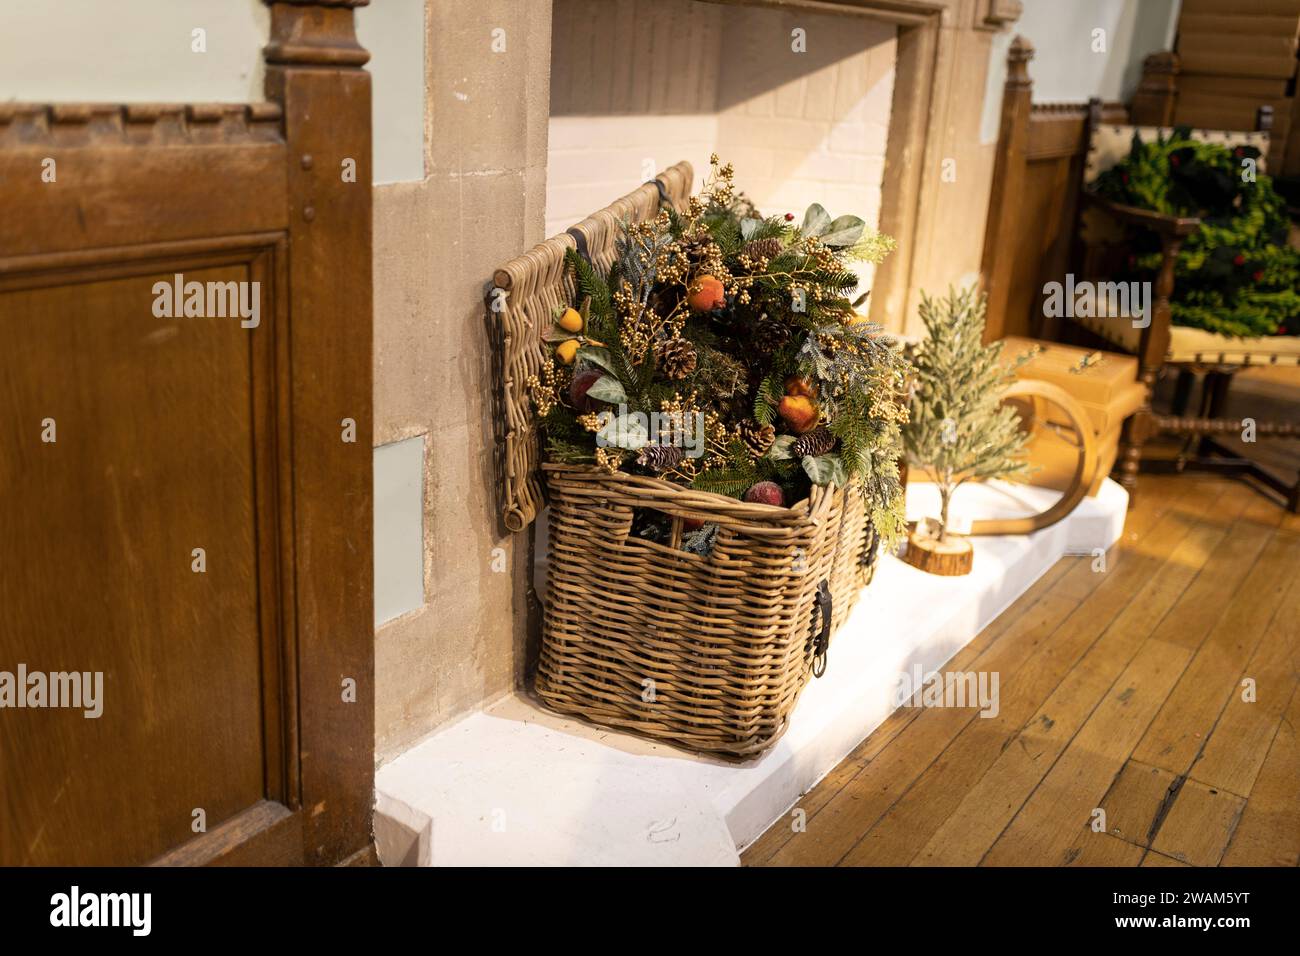 London, UK - 10 December 2023, Liberty Luxury department store various glass balls and toys for Christmas tree in baskets for sale Stock Photo